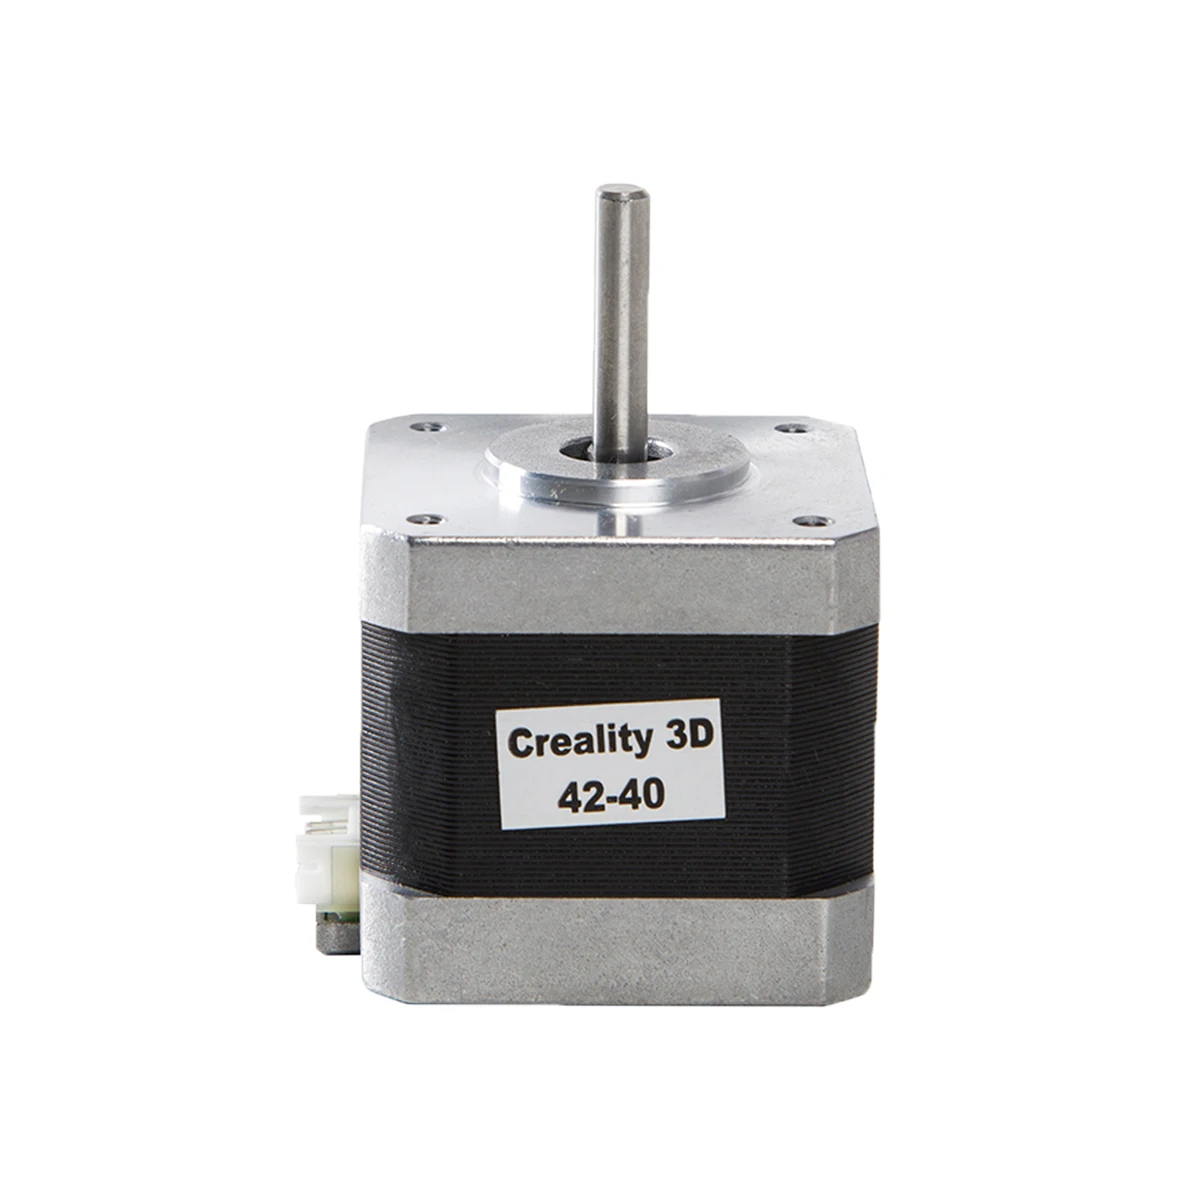 

Creality Stepper Motor 42-40, 2 Phases 1A 1.8 Degrees 0.4 N.M Extruder Stepper Motor for 3D Printer CR-10 Ender-3 Series E-axis